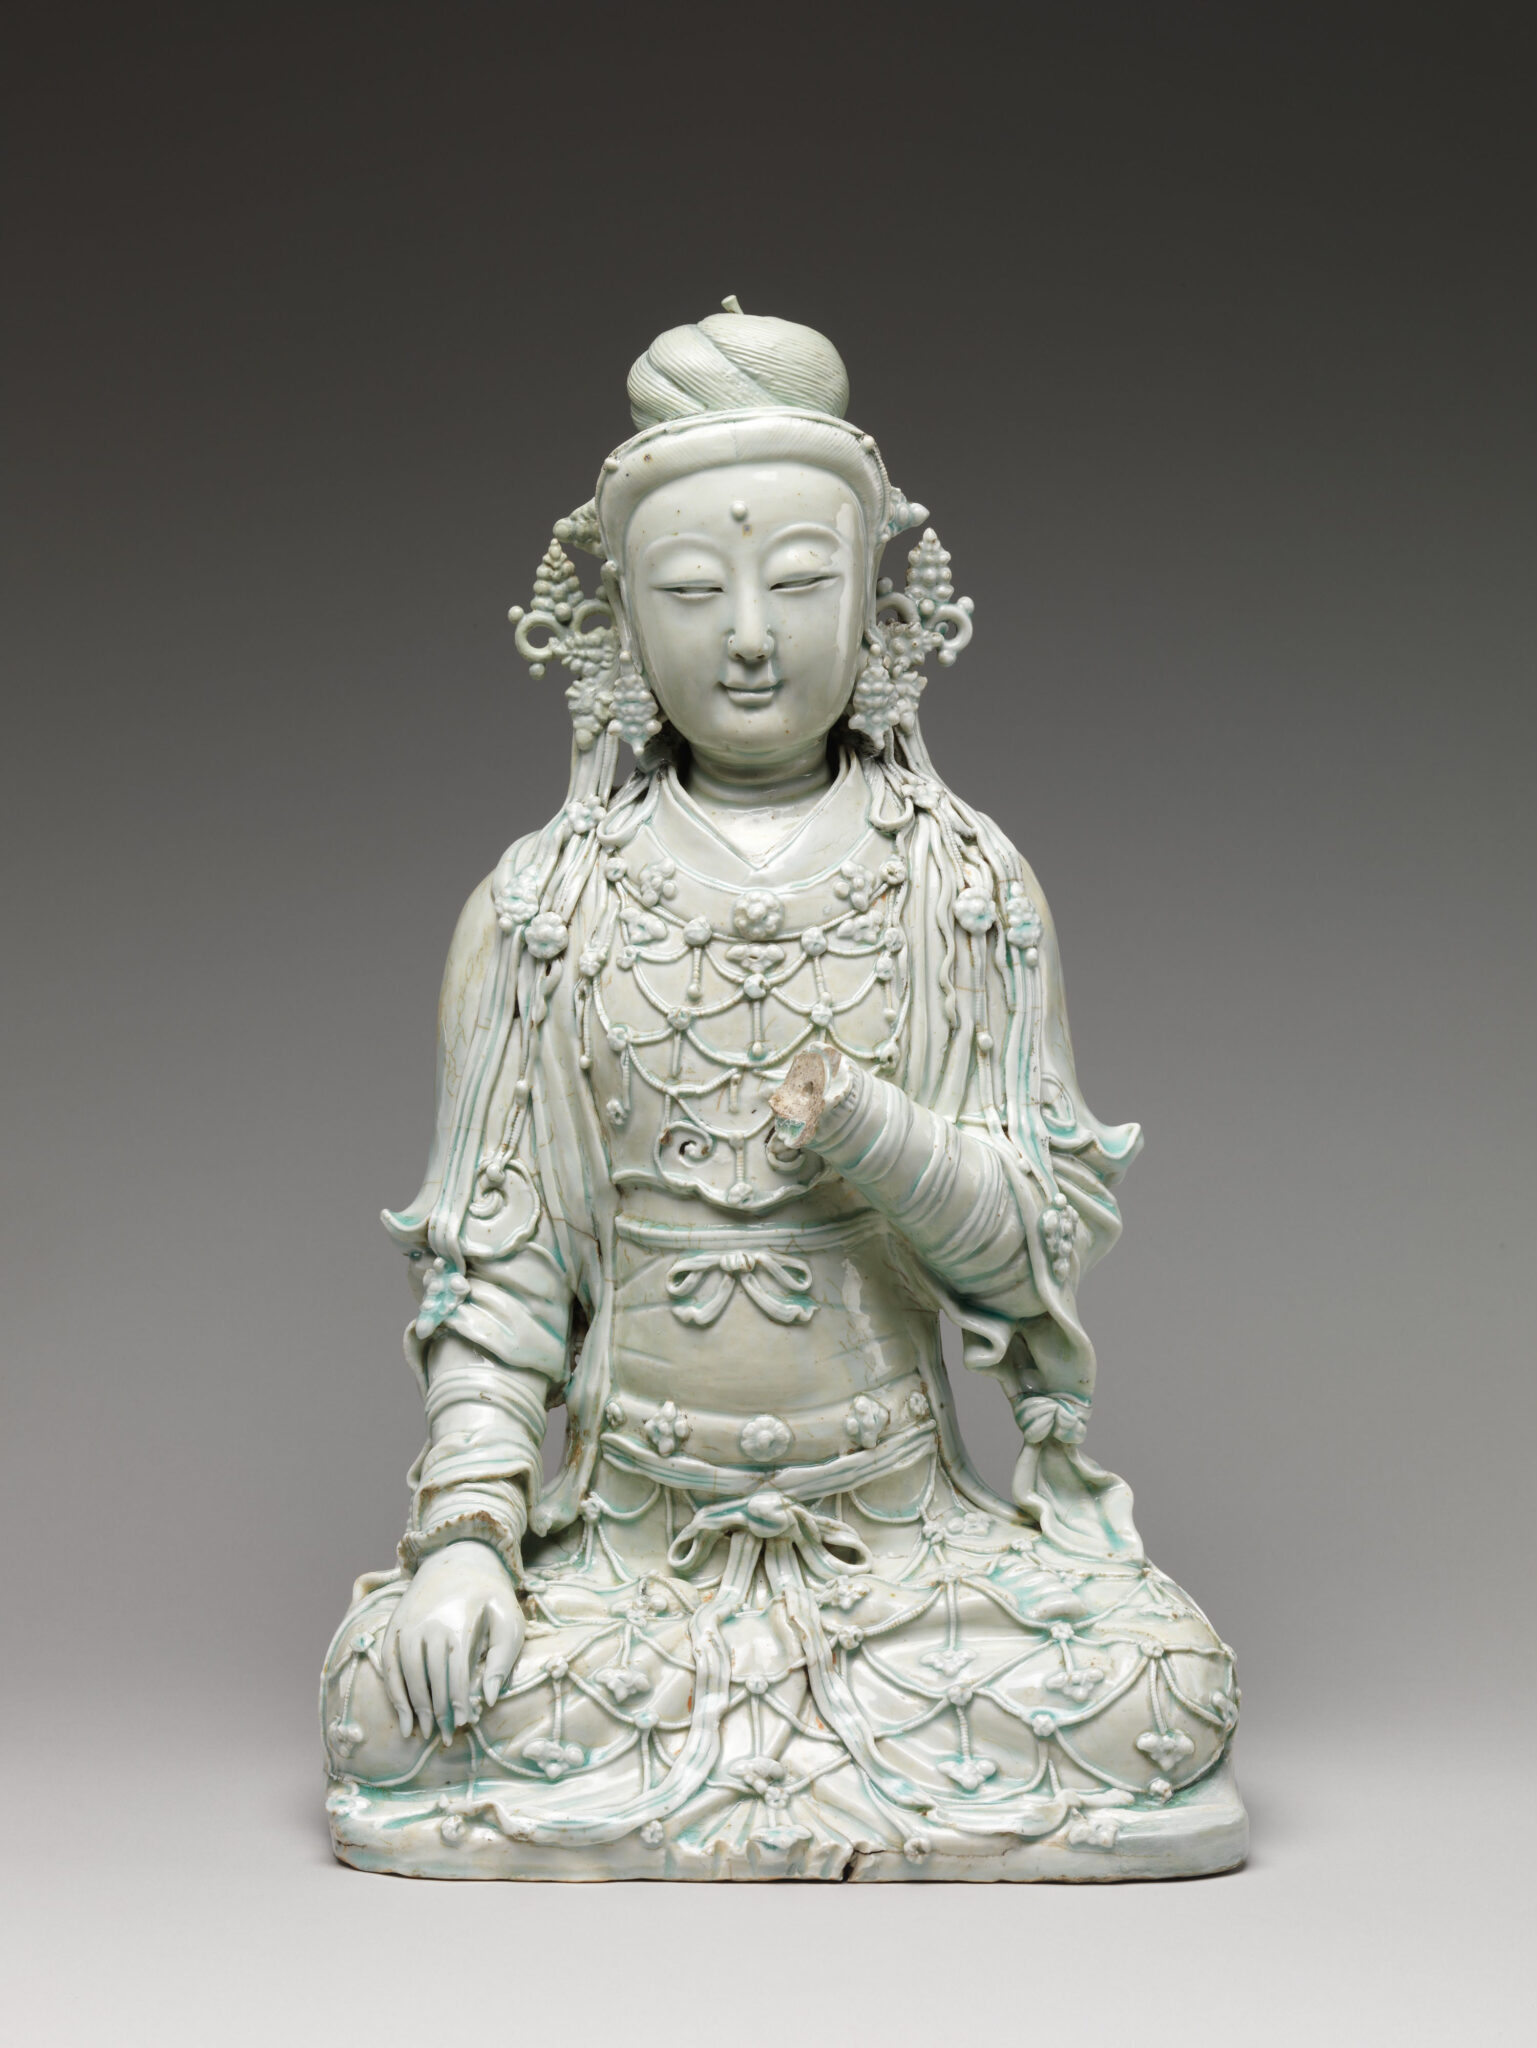 Light-turquoise seated Bodhisattva featuring finely detailed, patterned attire and accessories; right hand missing